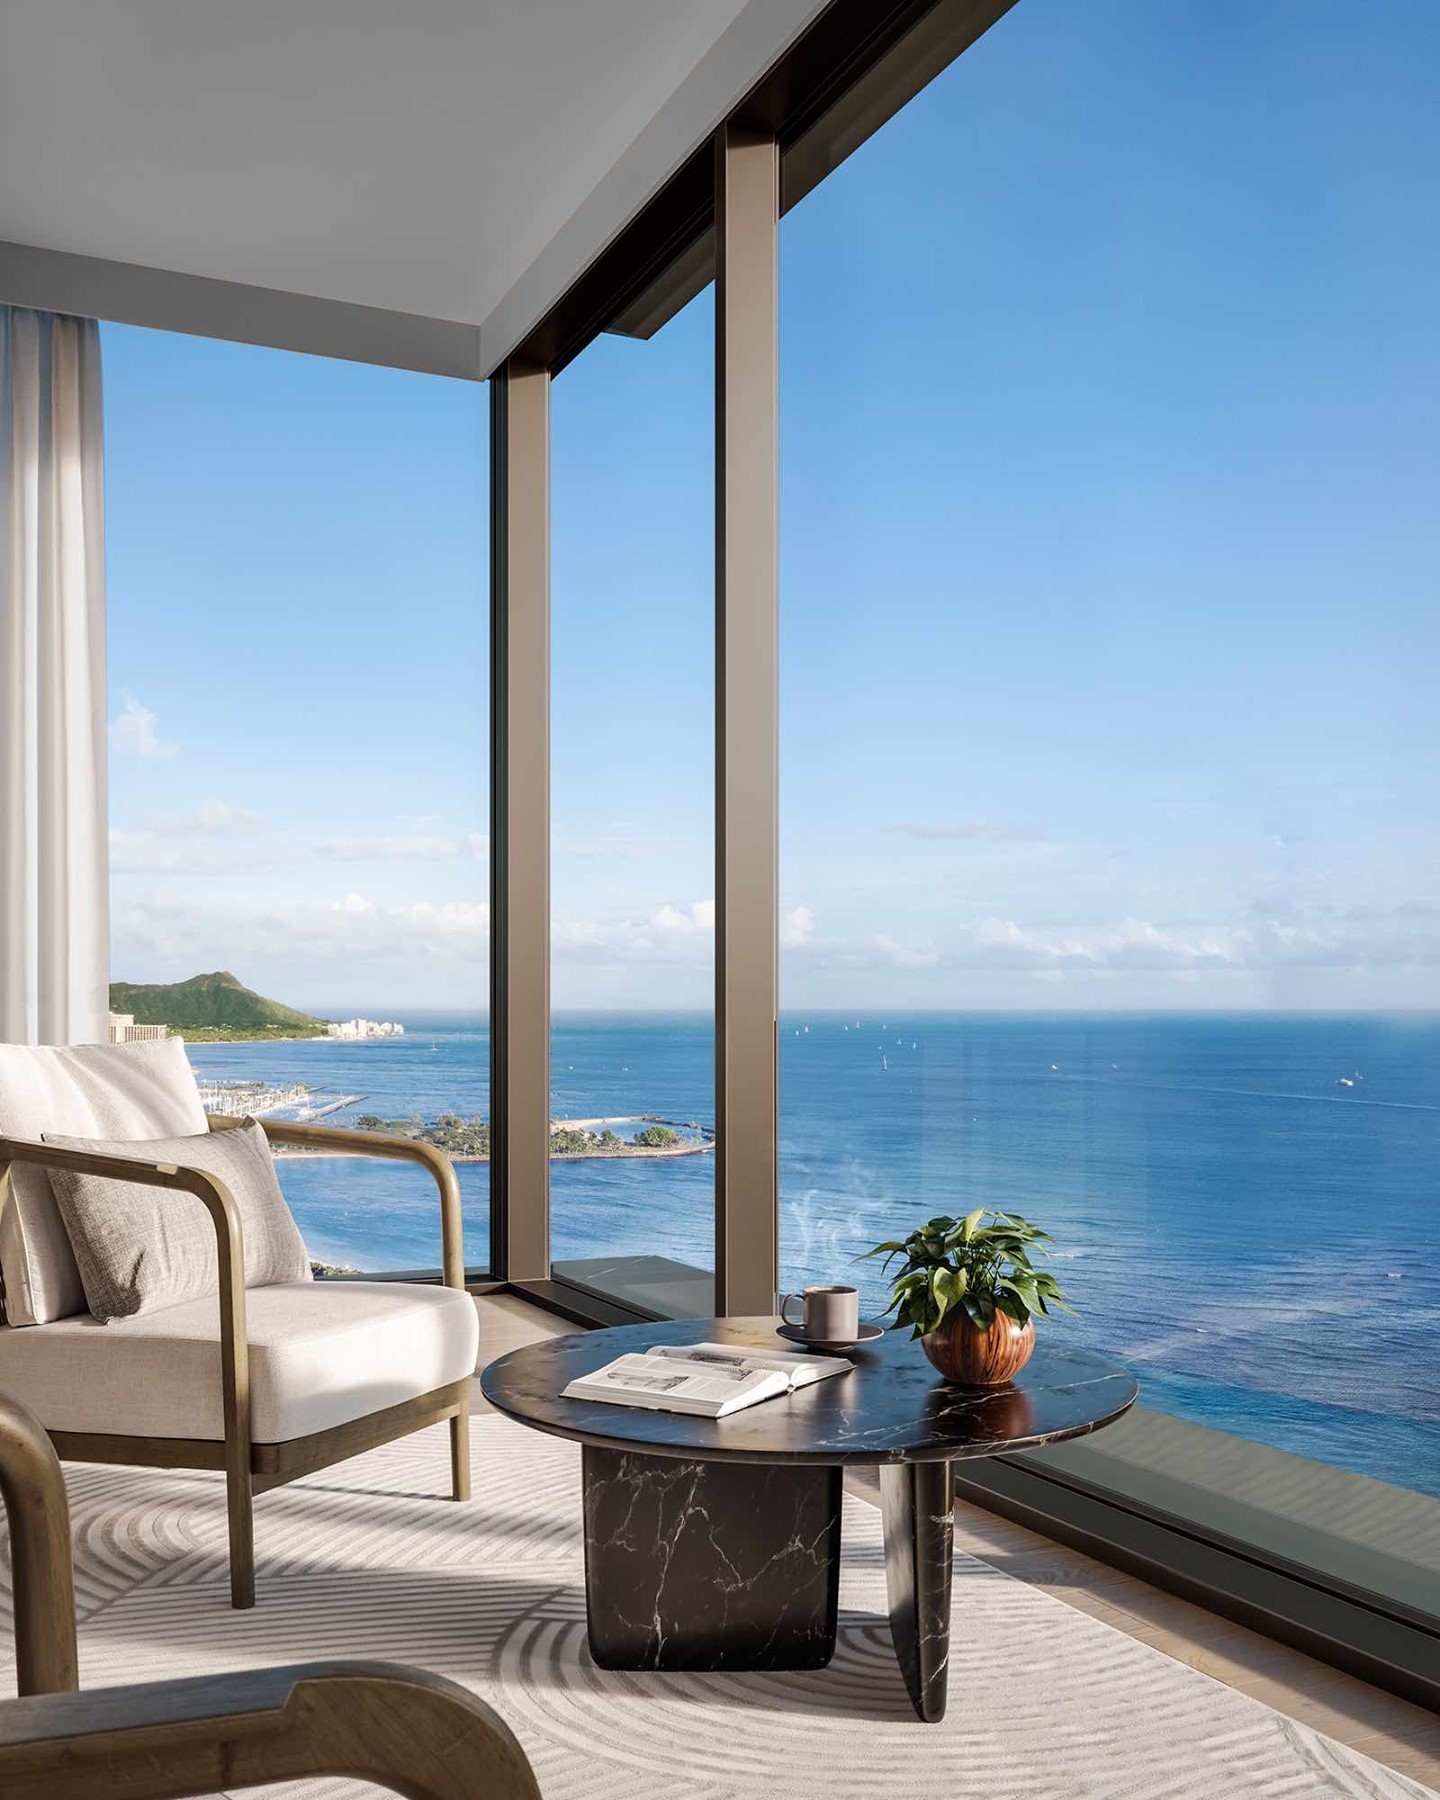 Picture yourself sipping your morning cup of coffee overlooking Honolulu’s stunning south shore. At Victoria Place, your home is your sanctuary, where the beauty of the island can be seen throughout and urban conveniences are right outside your door.